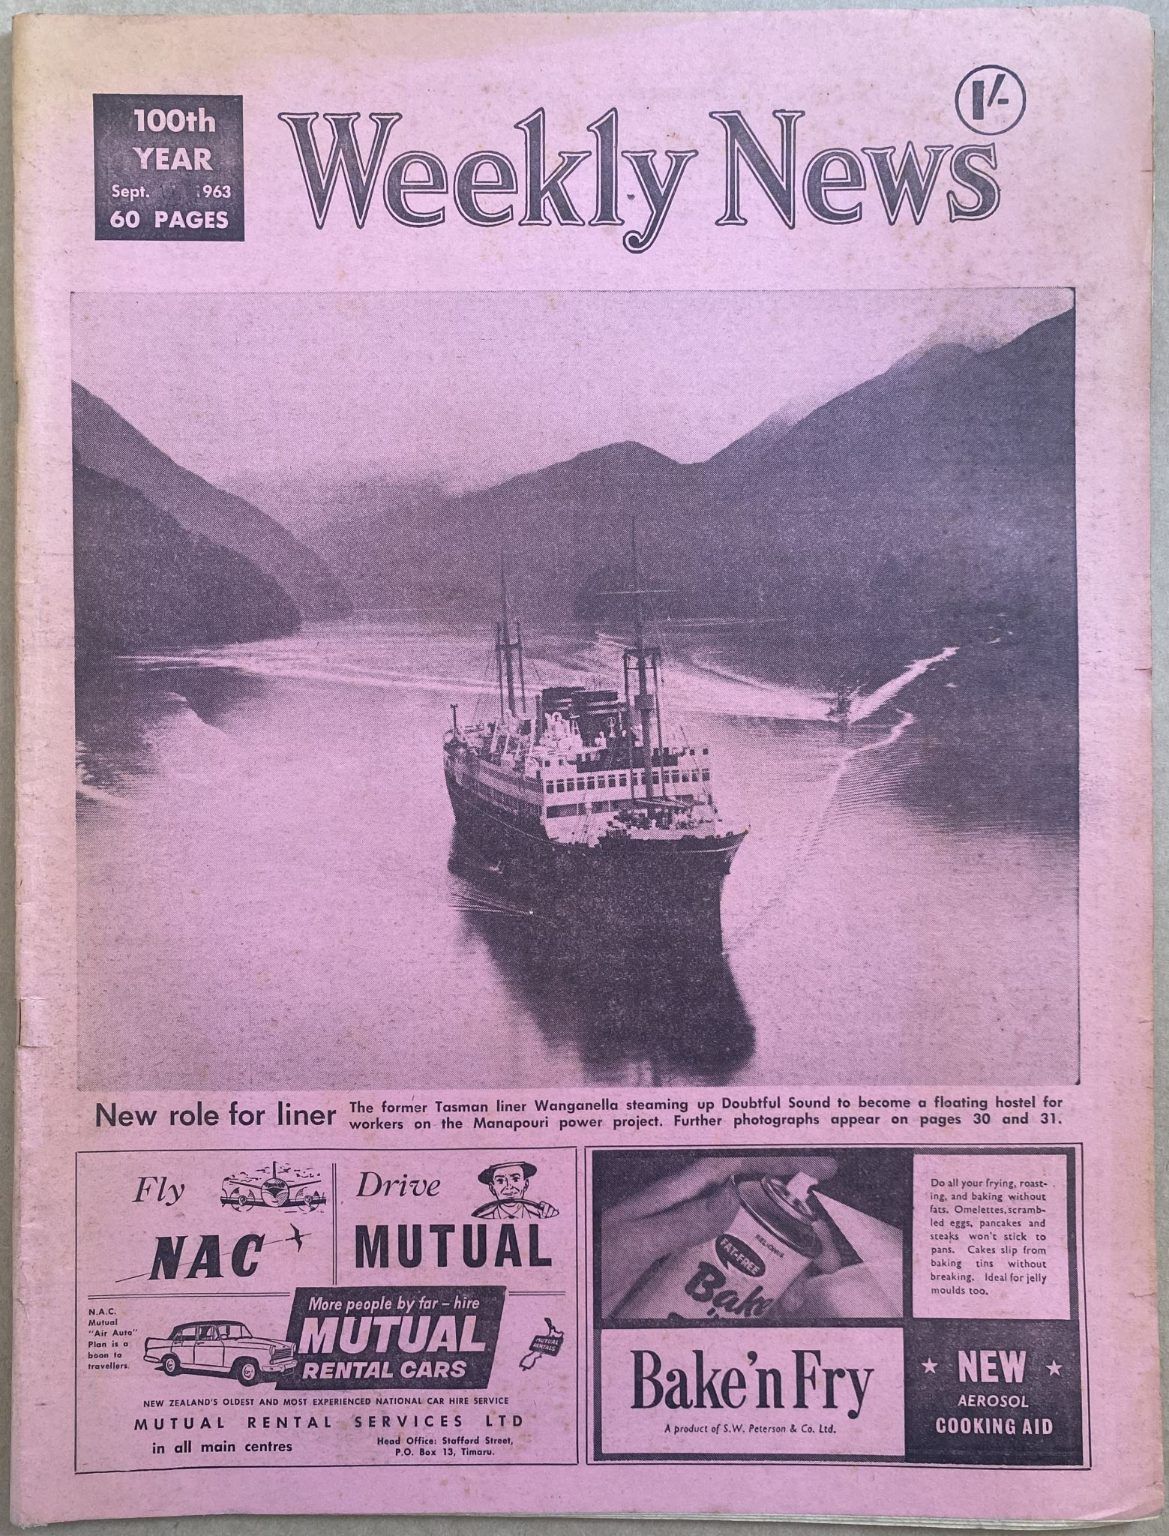 OLD NEWSPAPER: The Weekly News, No. 5207, 11 September 1963